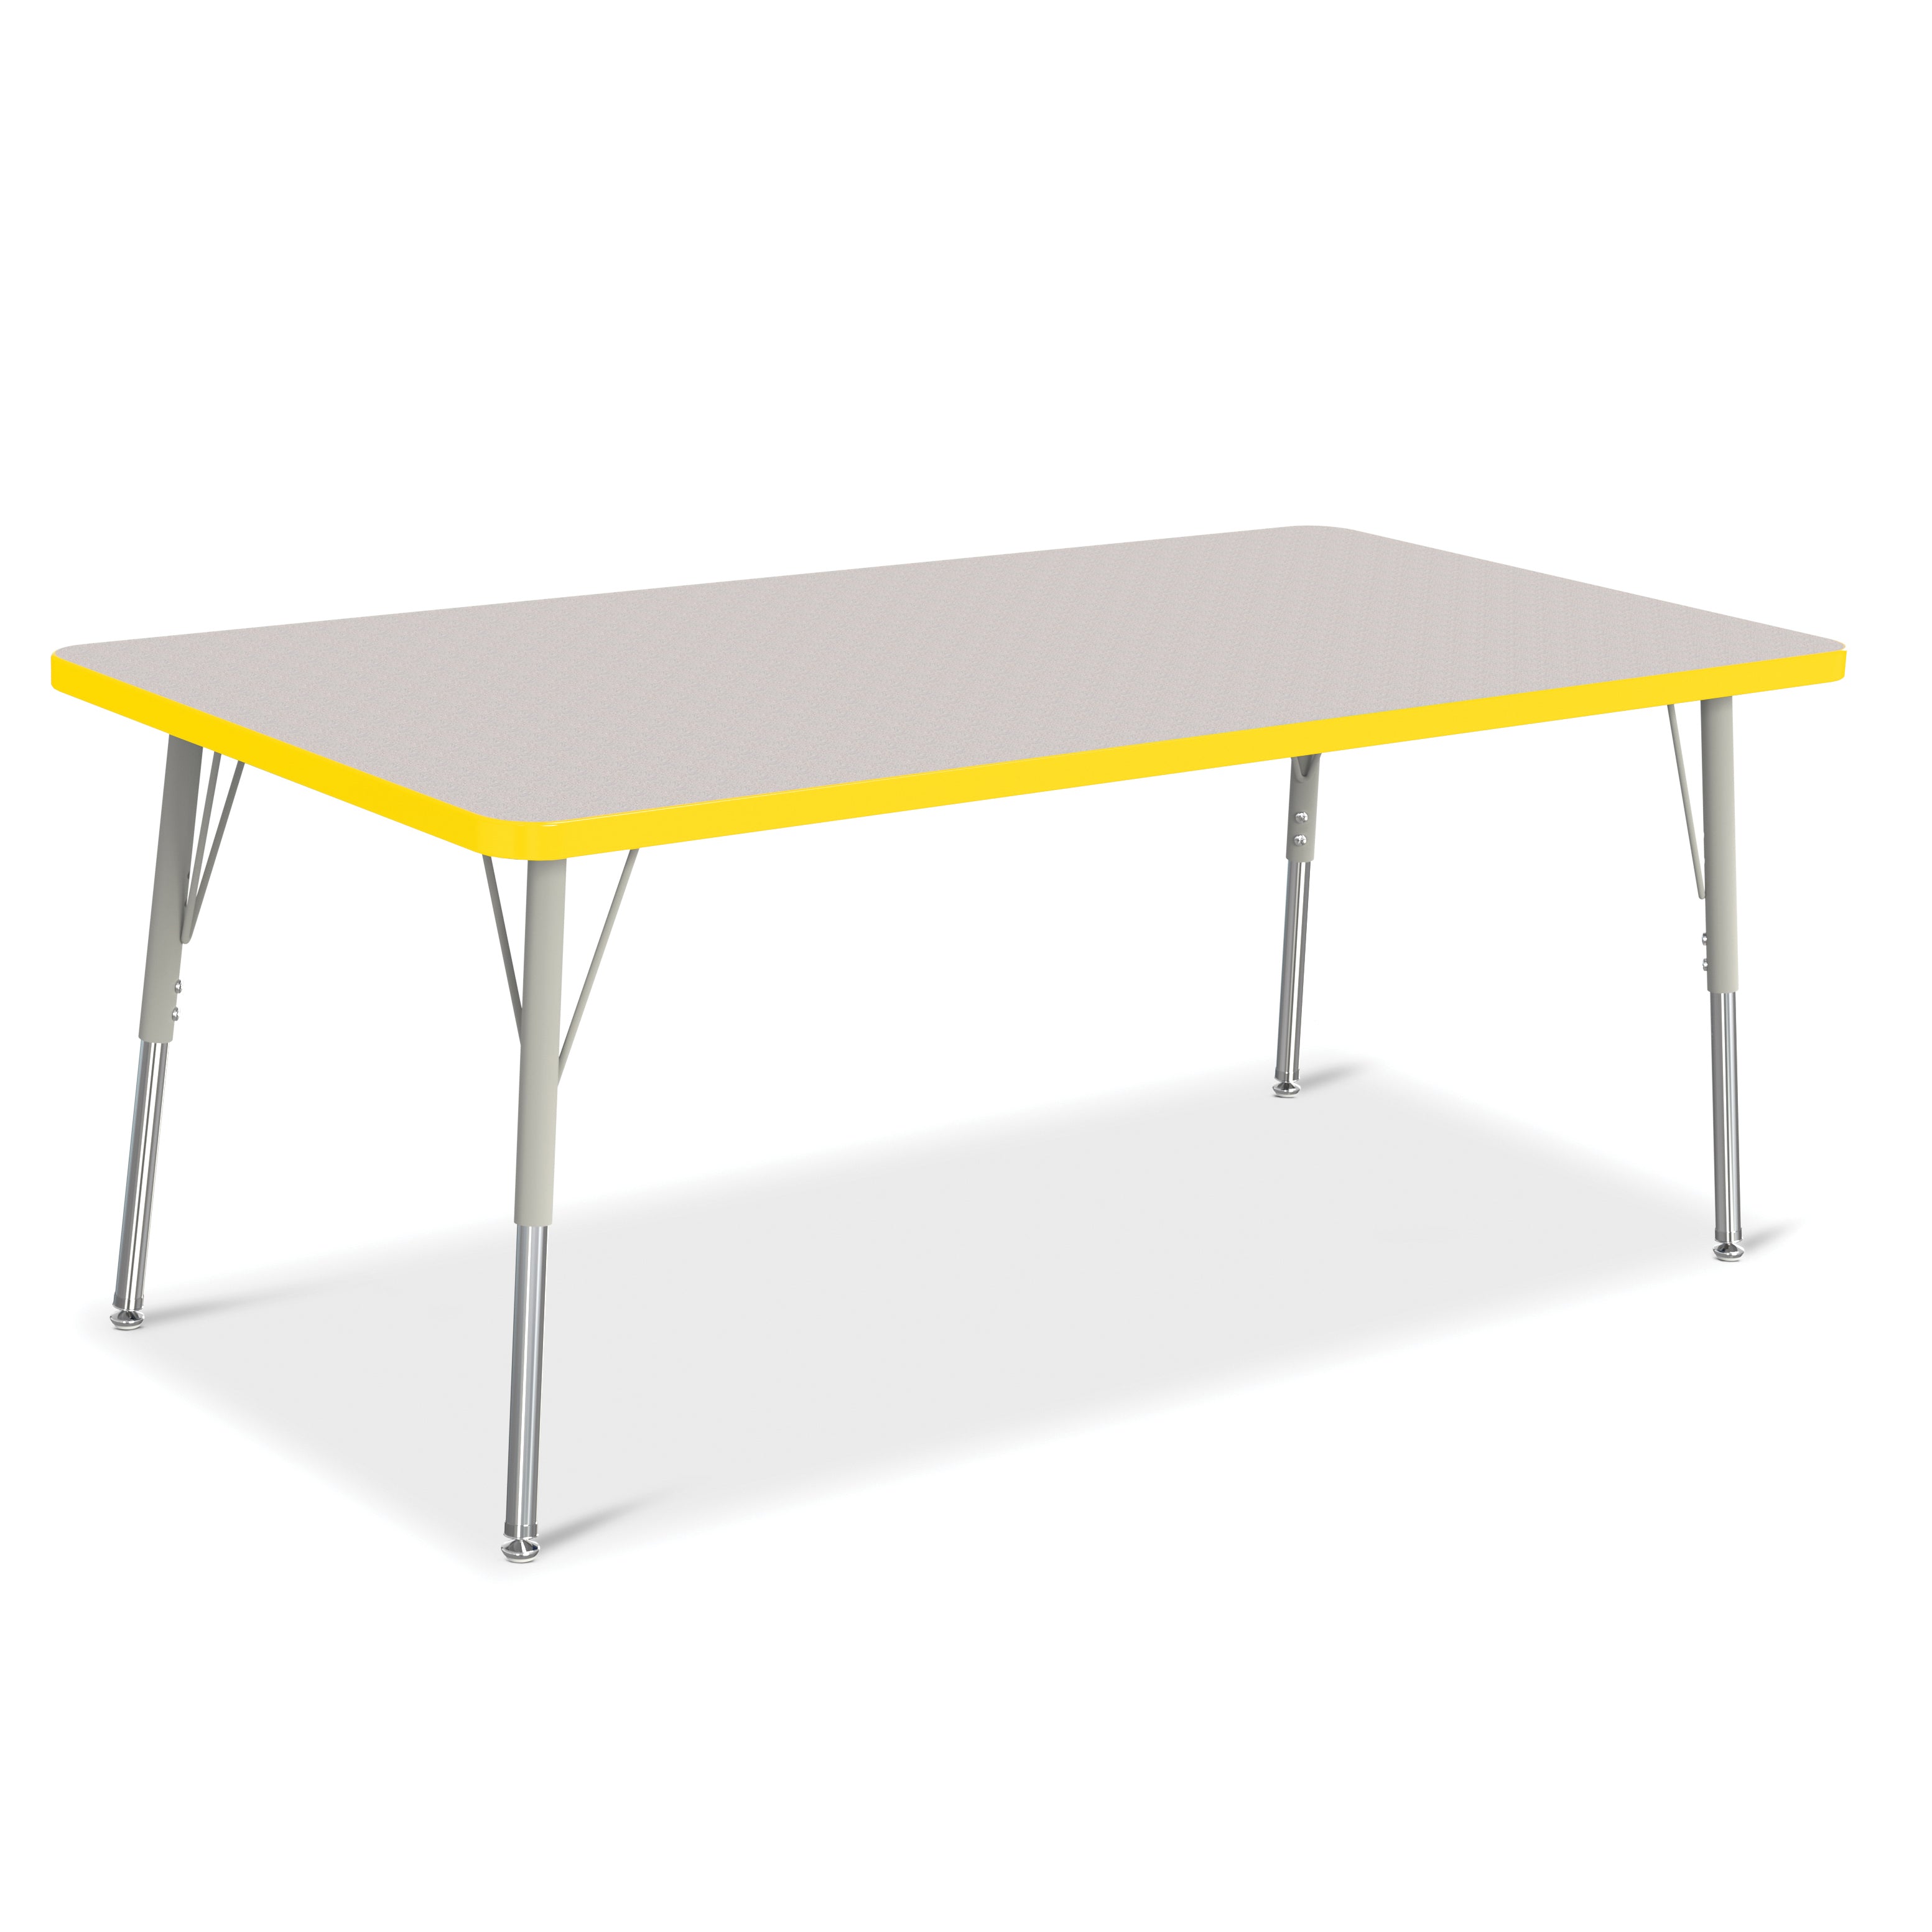 6408JCA007, Berries Rectangle Activity Table - 30" X 60", A-height - Freckled Gray/Yellow/Gray